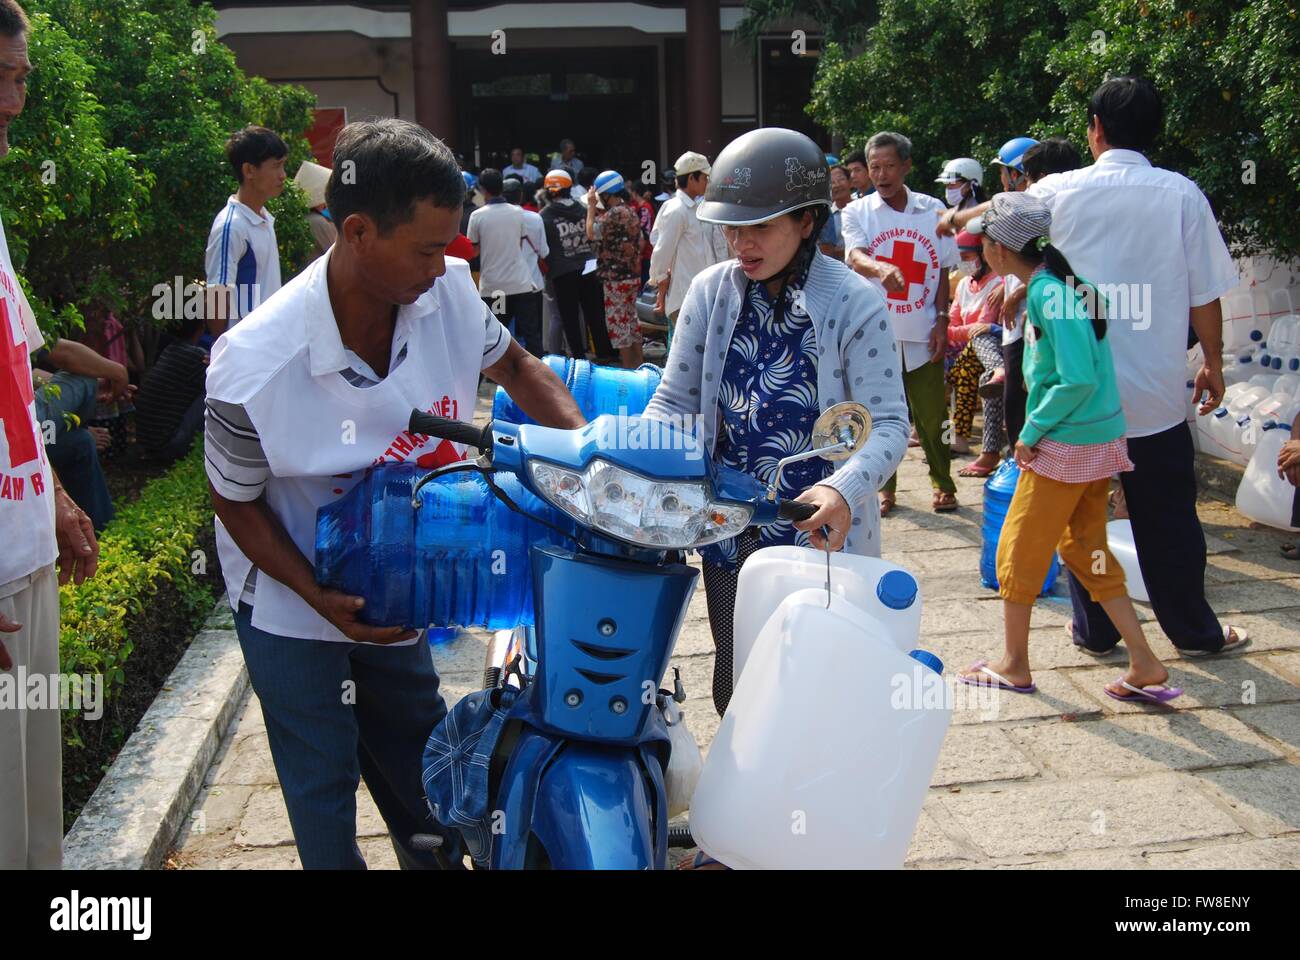 Ho Chi Minh City, Vietnam. 29th Mar, 2016. Members of Vietnam Red Cross distribute drinking water to local people in Ben Tre province, Vietnam, March 29, 2016. Due to the strong influence of the El Nino phenomenon, the Mekong Delta in southern Vietnam has encountered once in a century drought since the end of 2015 which seriously affected local people's life. Mekong Delta, Vietnam's largest and most fertile plain, has an area of over 40,000 square kilometers and covers 13 provinces and cities. © VNA/Xinhua/Alamy Live News Stock Photo